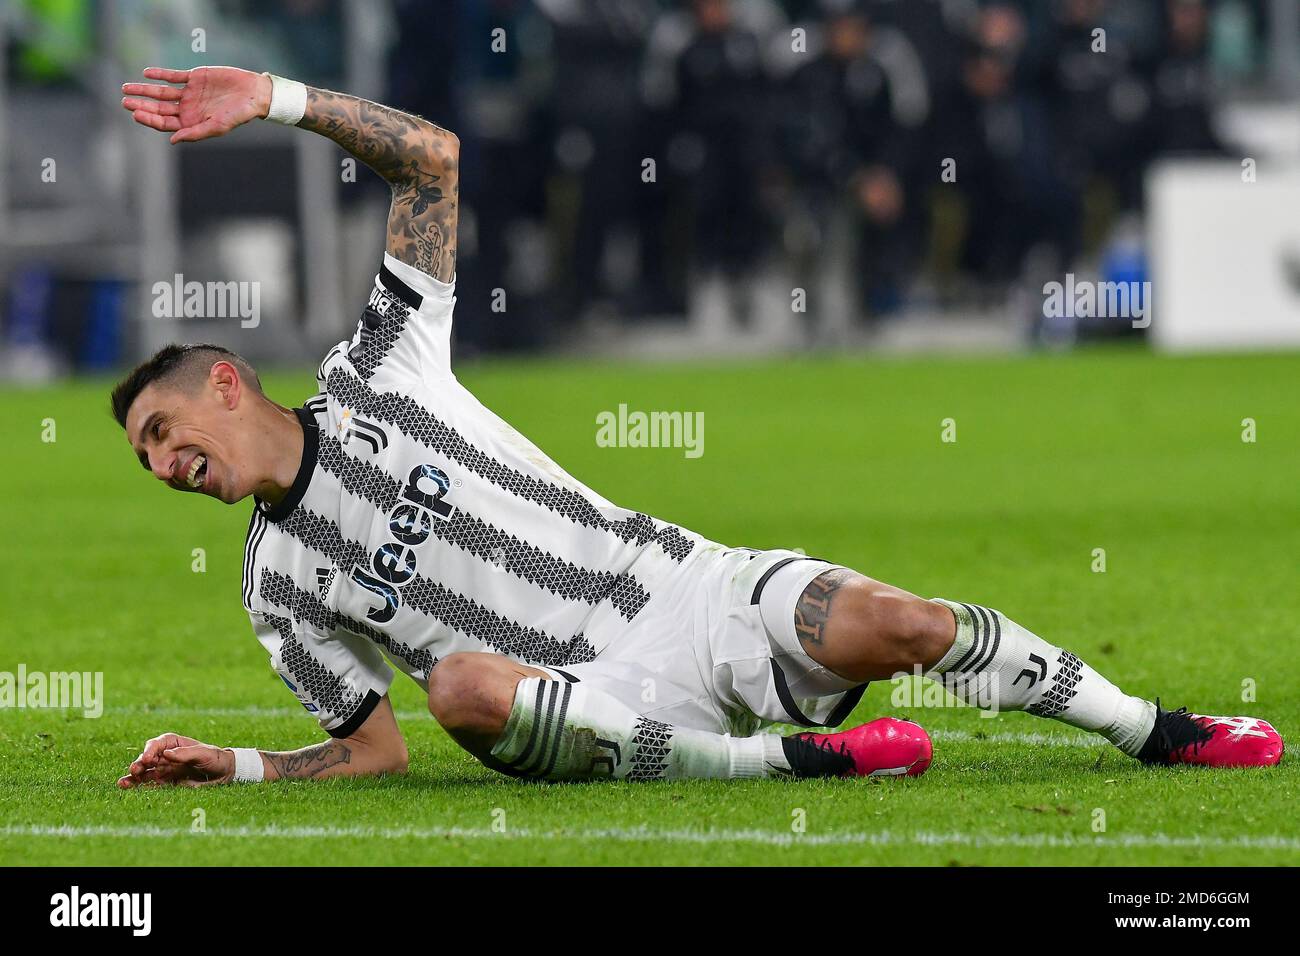 Torino, Italy. 22nd Jan, 2023. Angel Di Maria of Juventus FC reacts during the Serie A football match between Juventus FC and Atalanta BC at Juventus stadium in Torino (Italy), January 22th, 2022. Photo Giuliano Marchisciano/Insidefoto Credit: Insidefoto di andrea staccioli/Alamy Live News Stock Photo